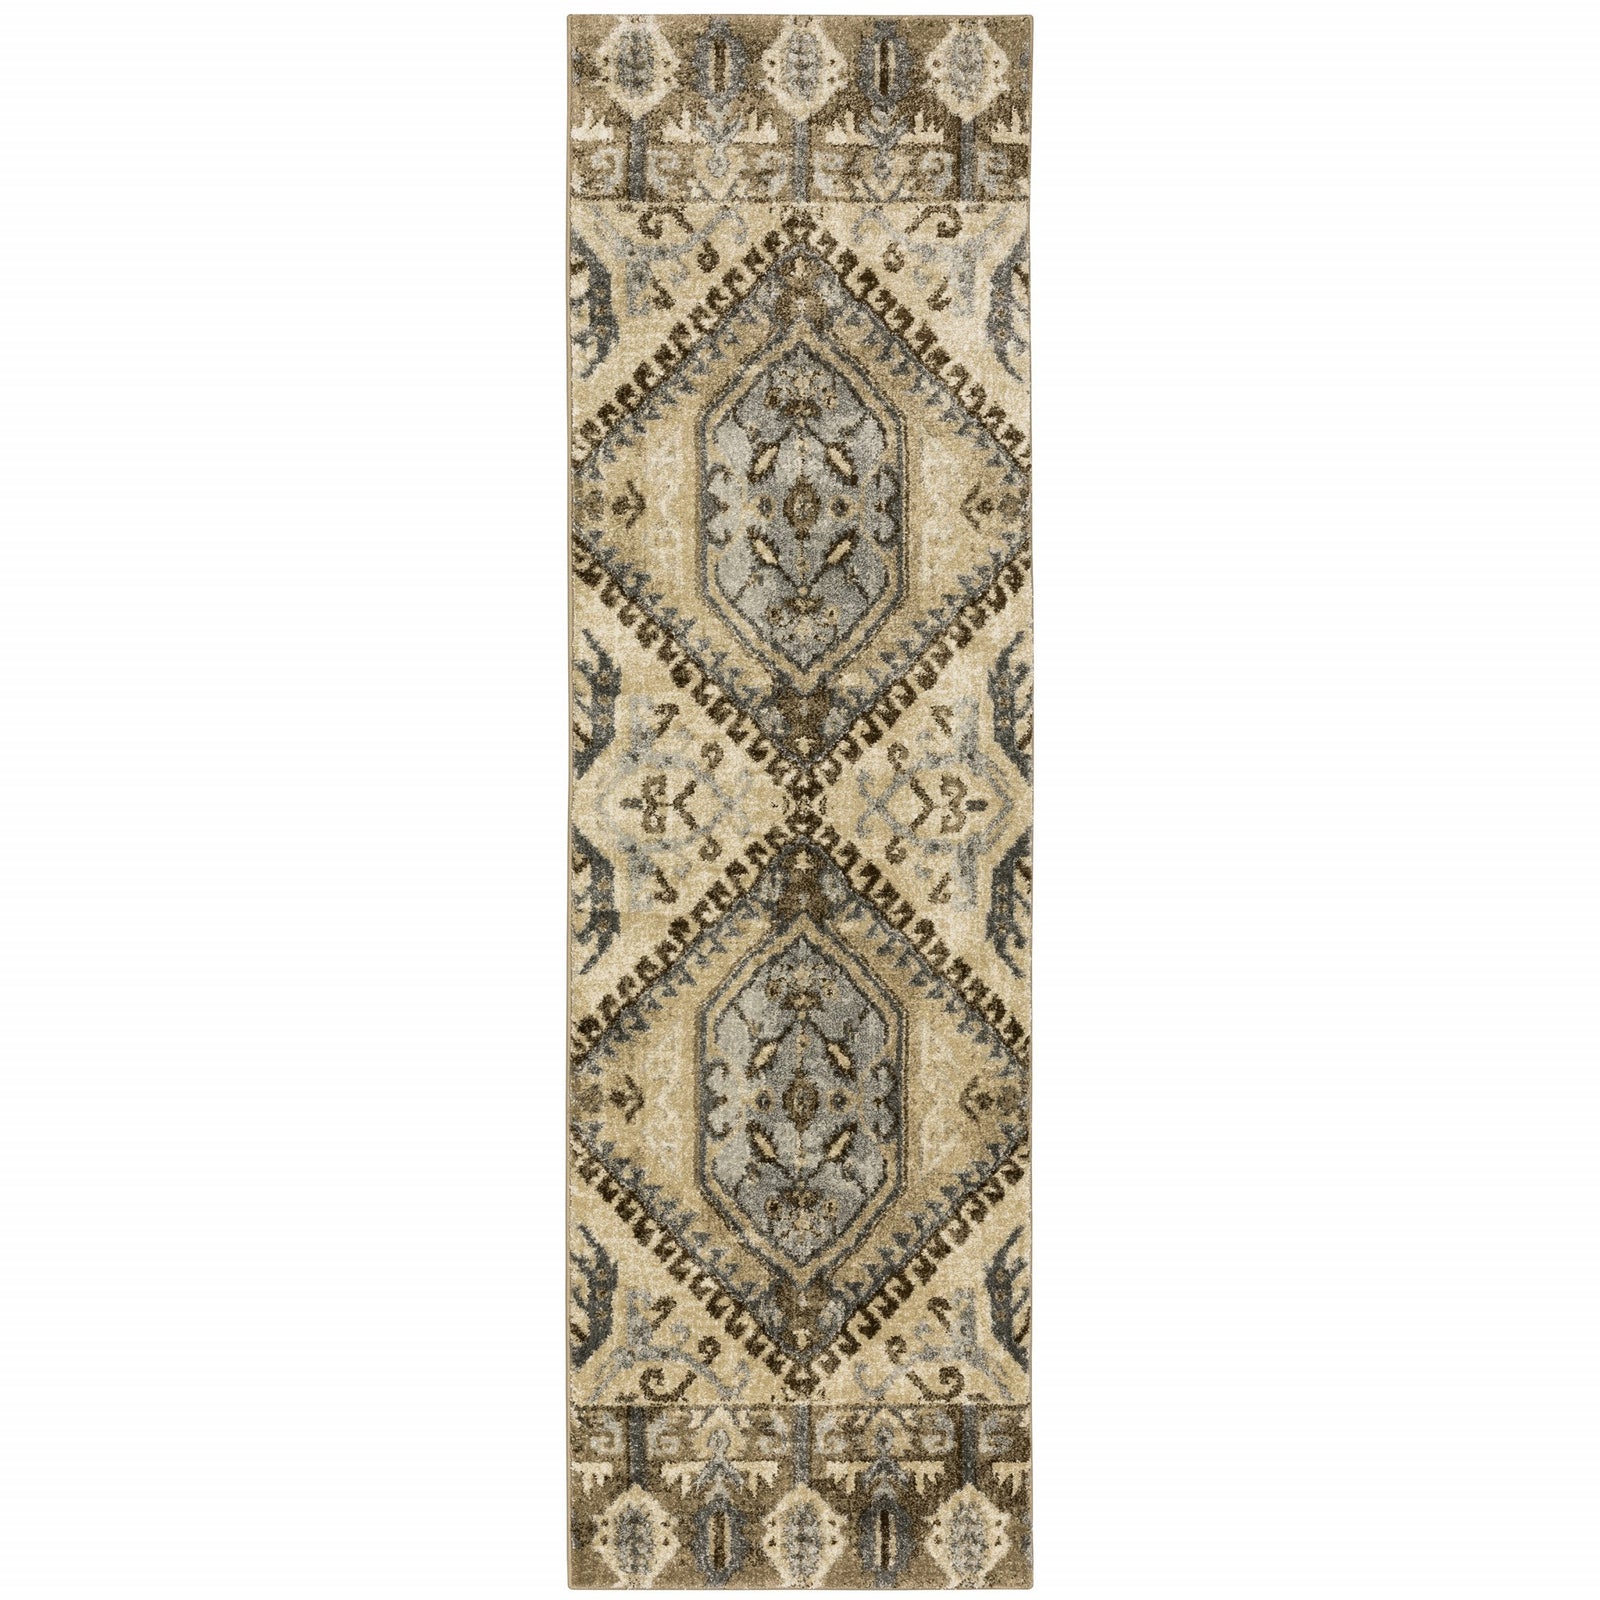 2’ X 8’ Tan And Gold Central Medallion Indoor Runner Rug